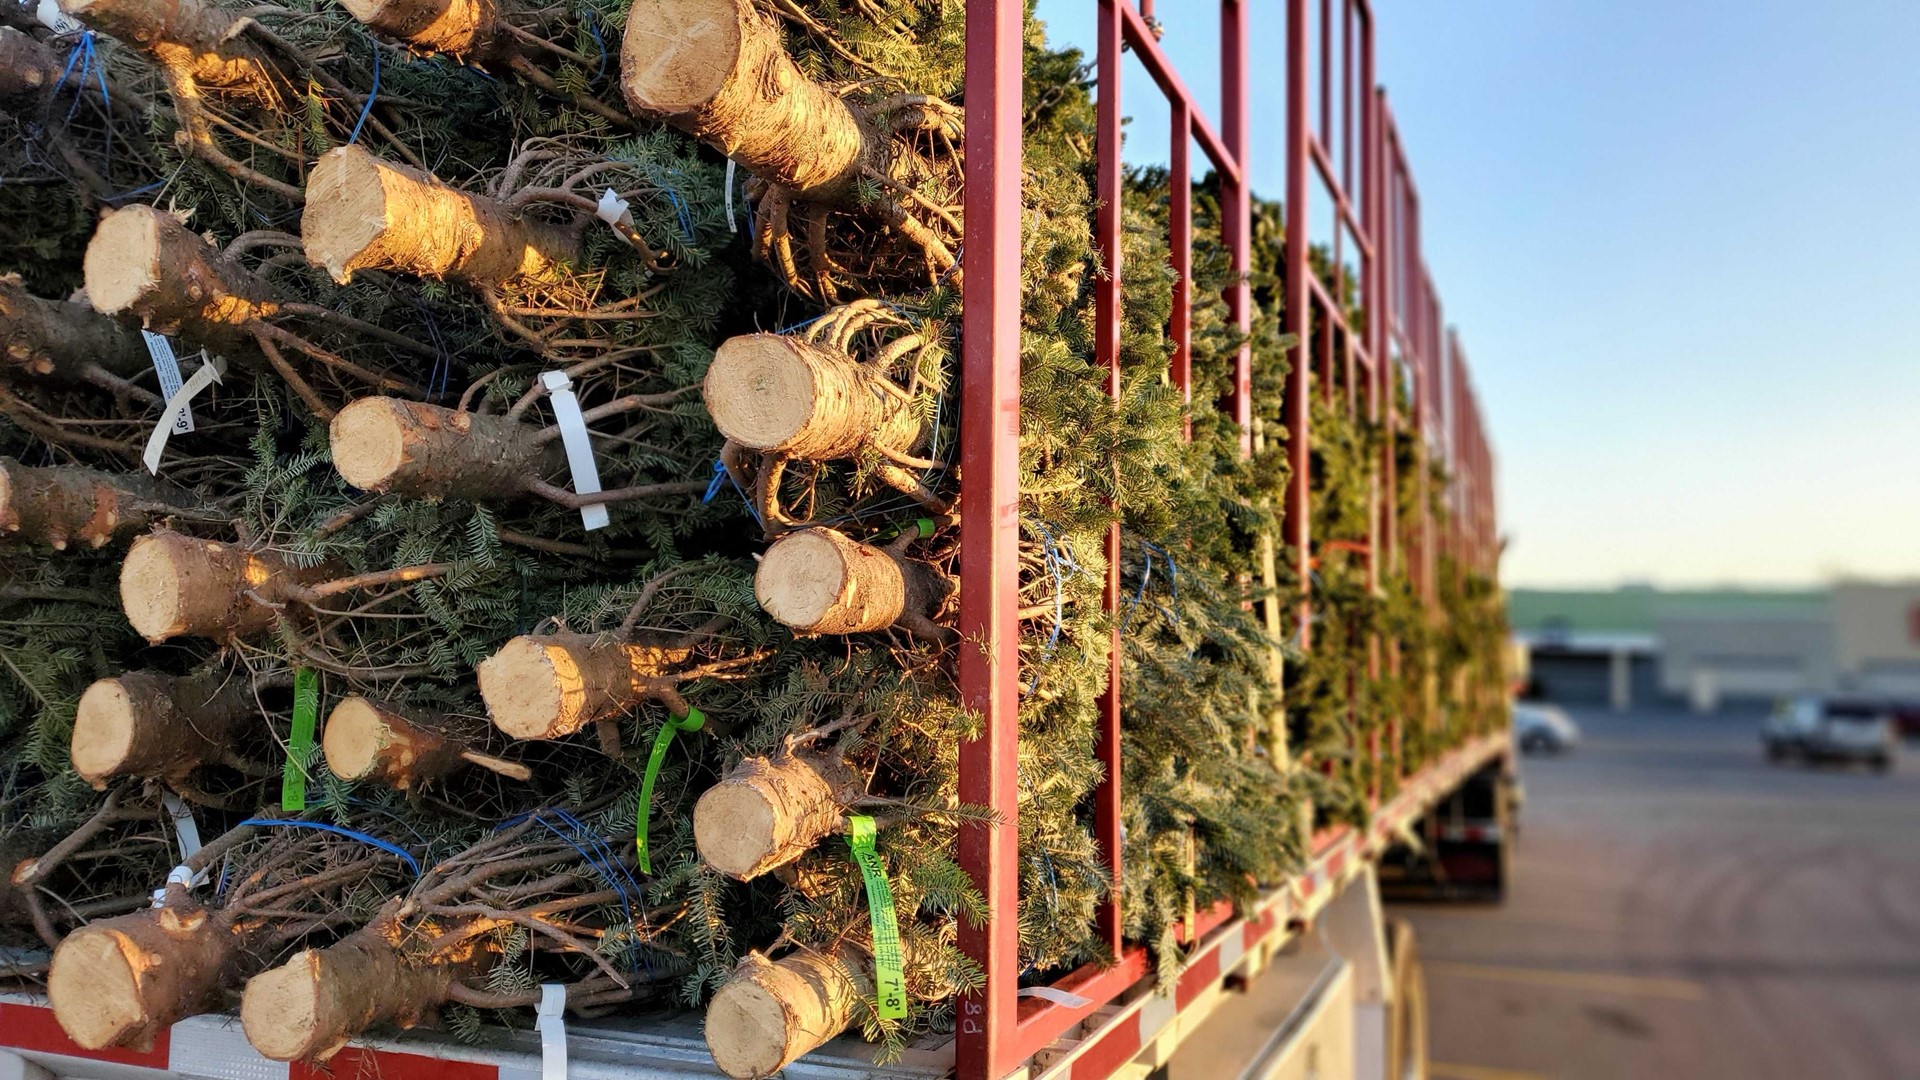 Martin's Christmas Tree Lot is one of the few in Southern Indiana opening for the holidays this year.